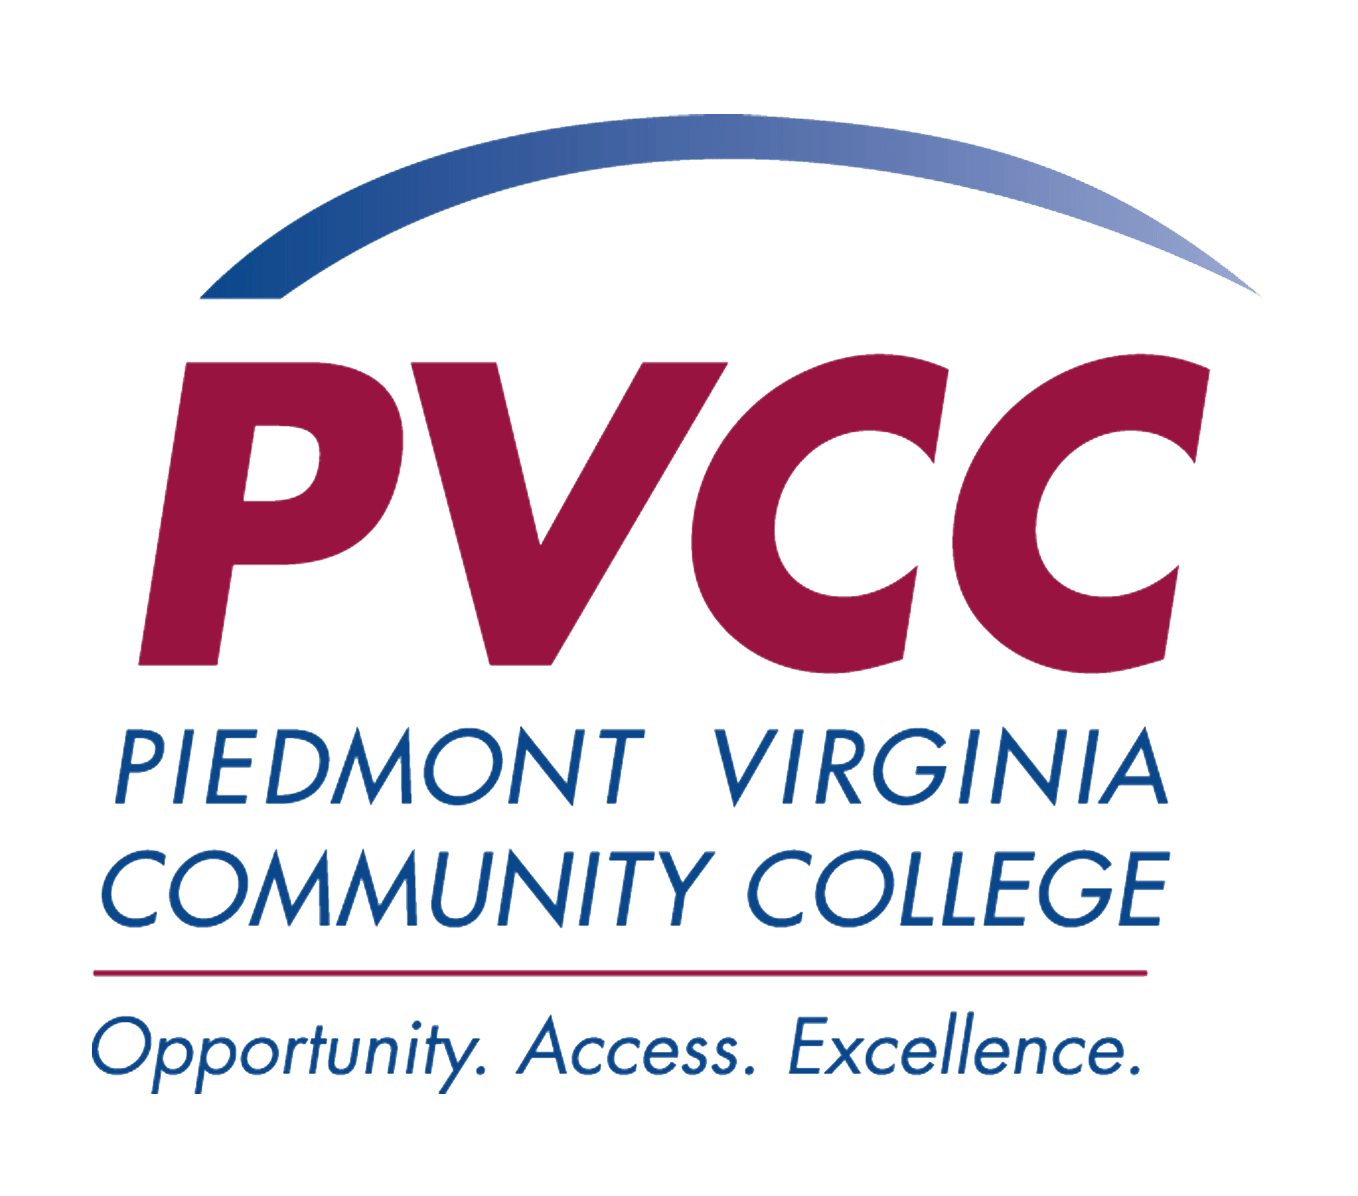 PVCC Logo - Piedmont Virginia Community College. Opportunity Access Excellence